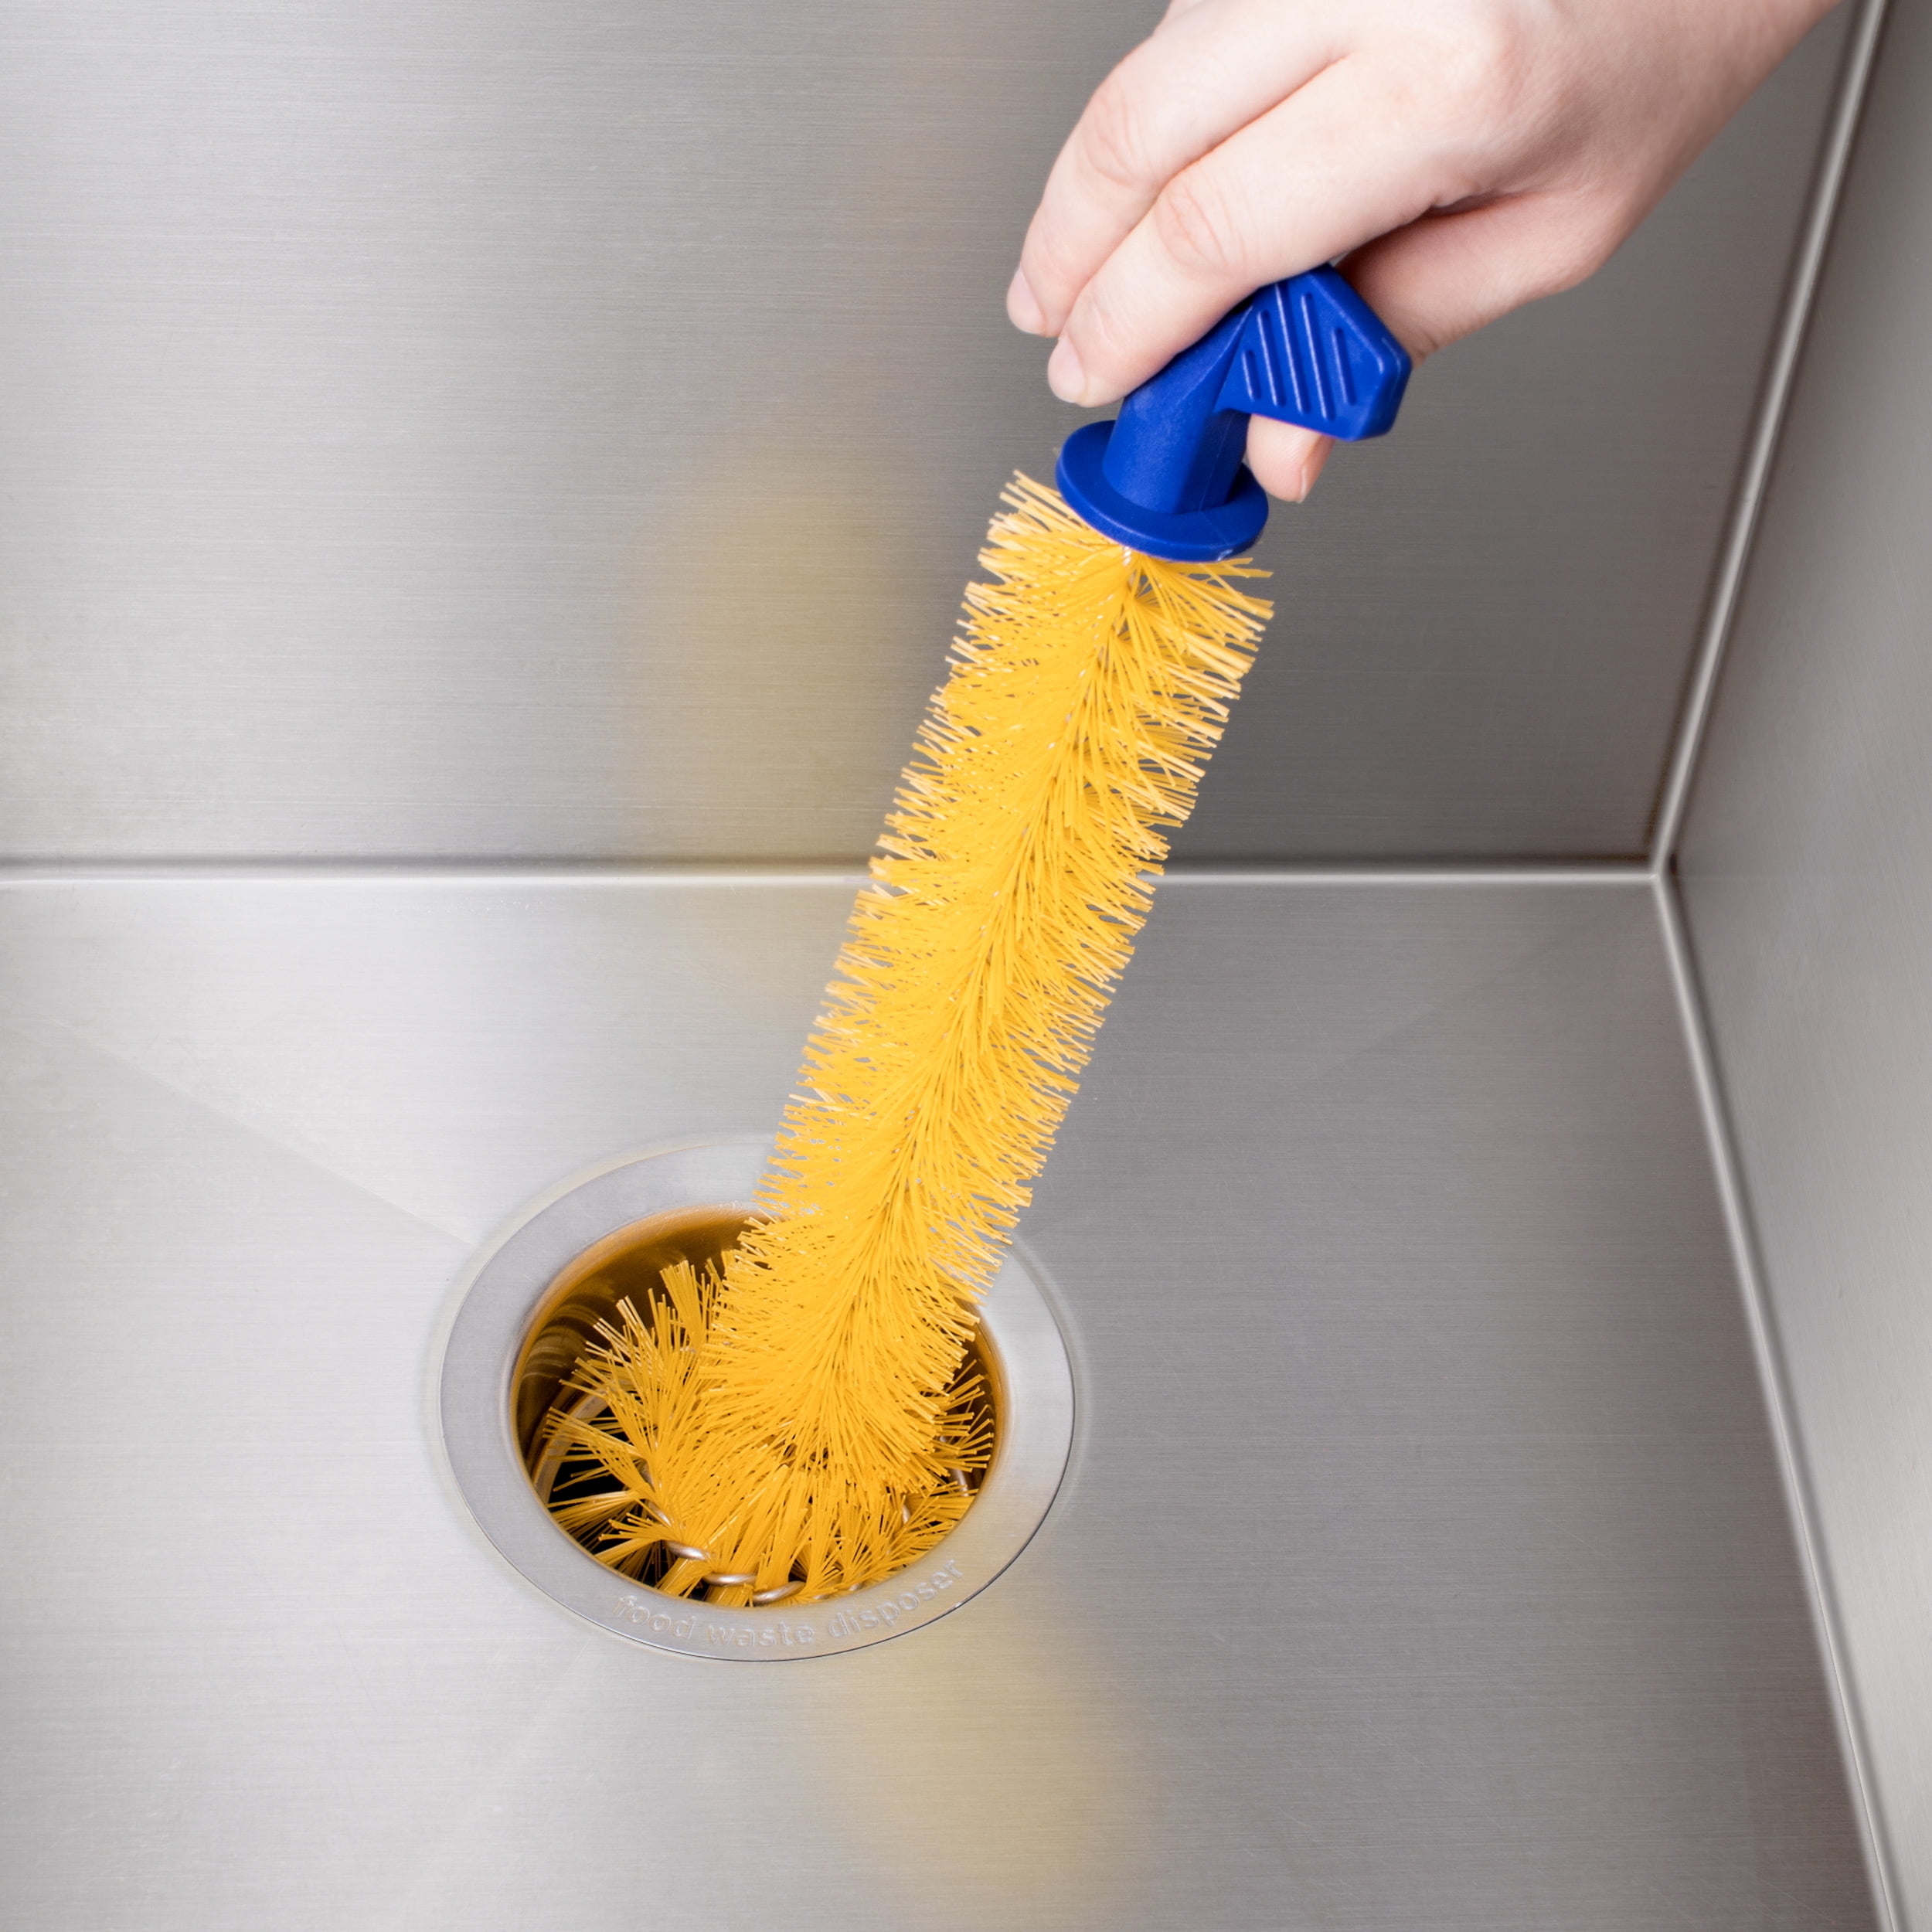 Hand using a yellow bristle brush for cleaning a stainless steel sink drain